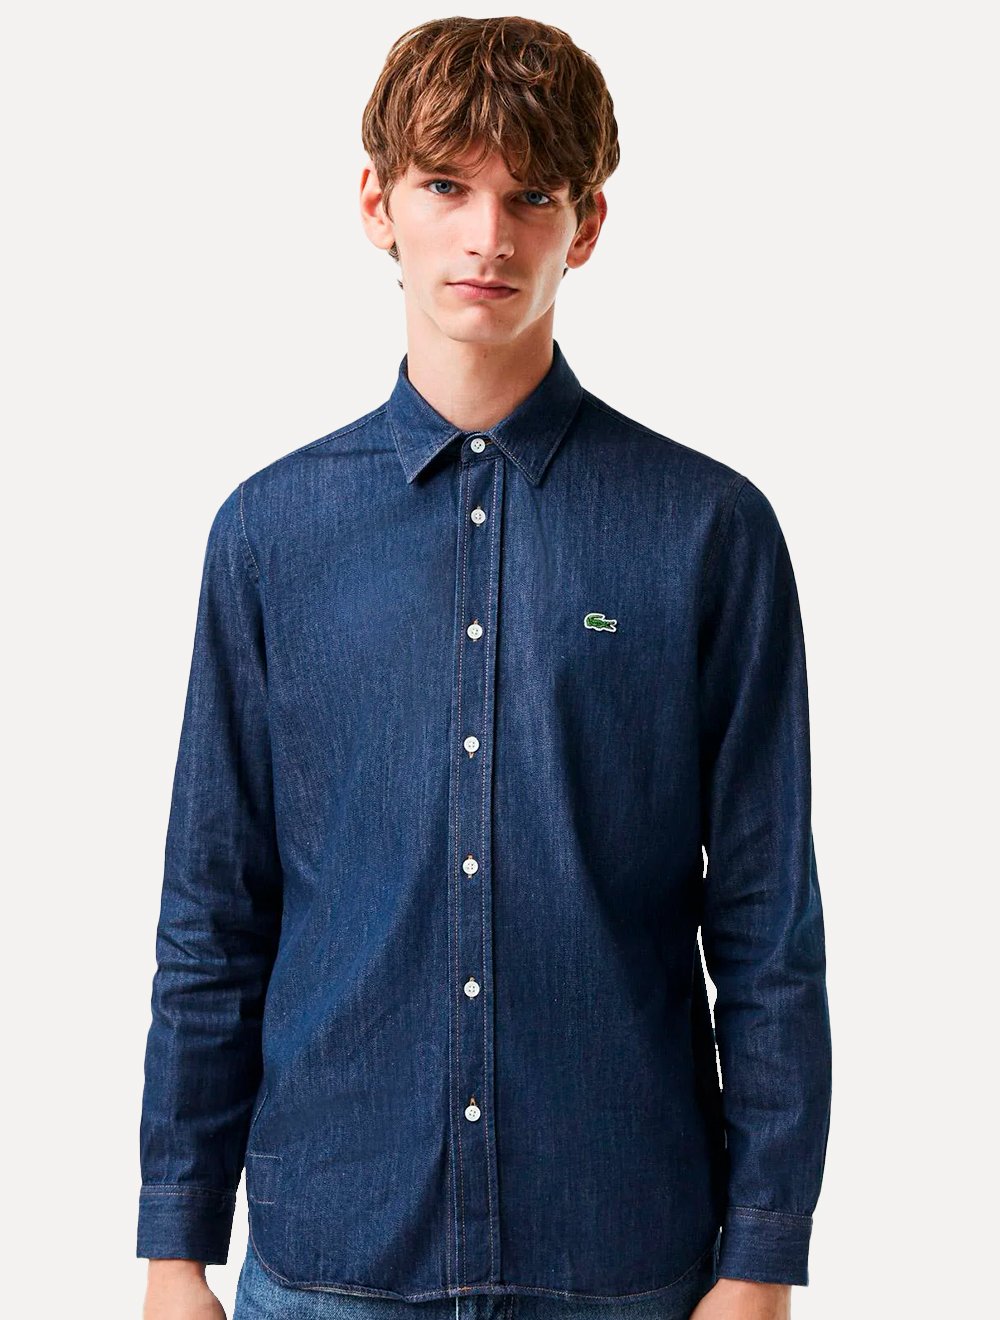 Camisa Lacoste Masculina Jeans Regular Fit Logo Escura